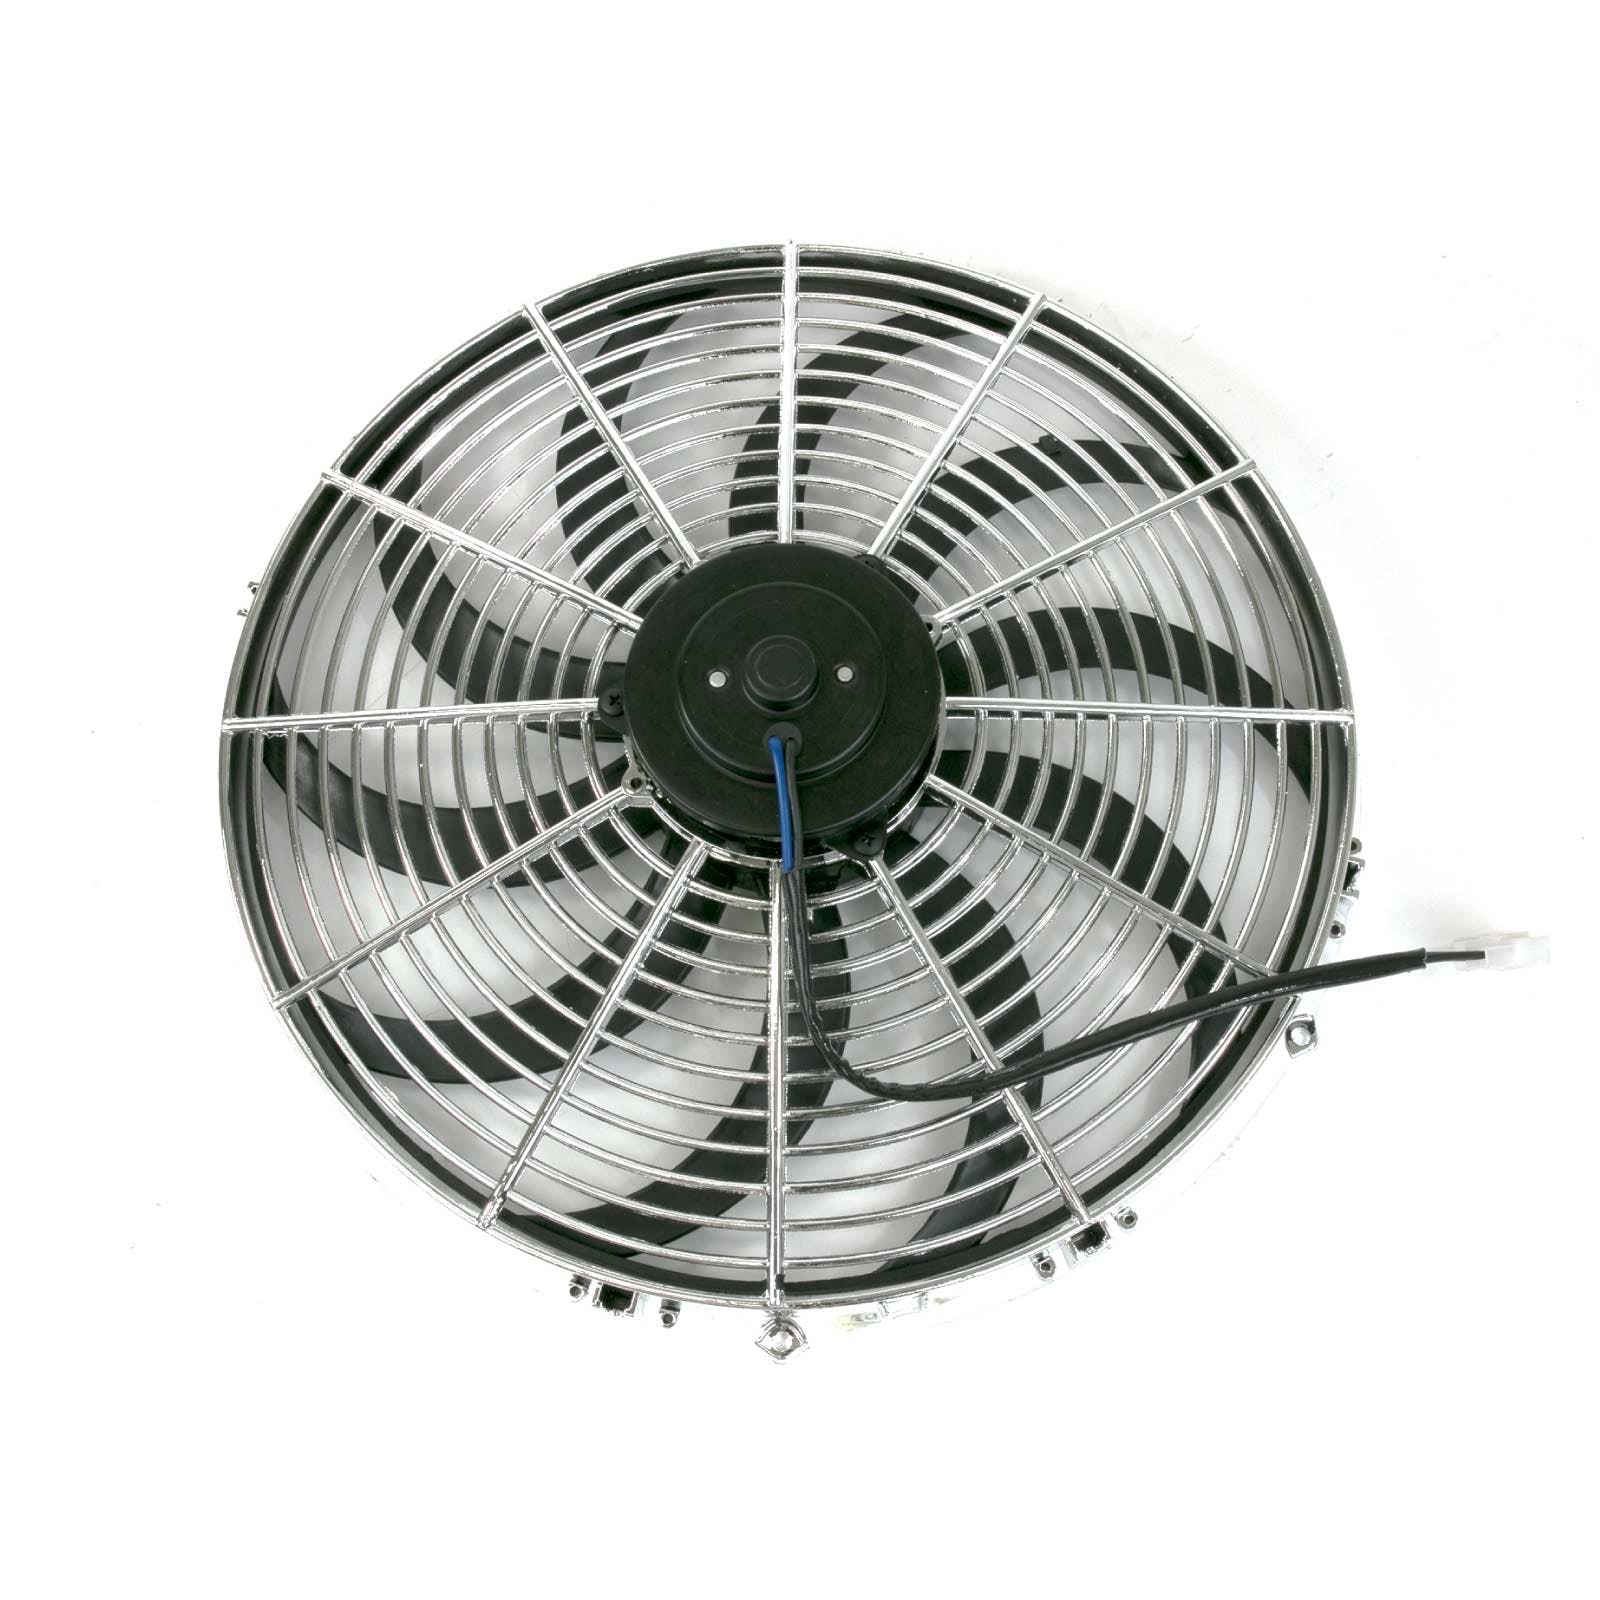 Top Street Performance HC6105C 16 inch Universal Electric Cooling Fan, S-Blade, Chrome